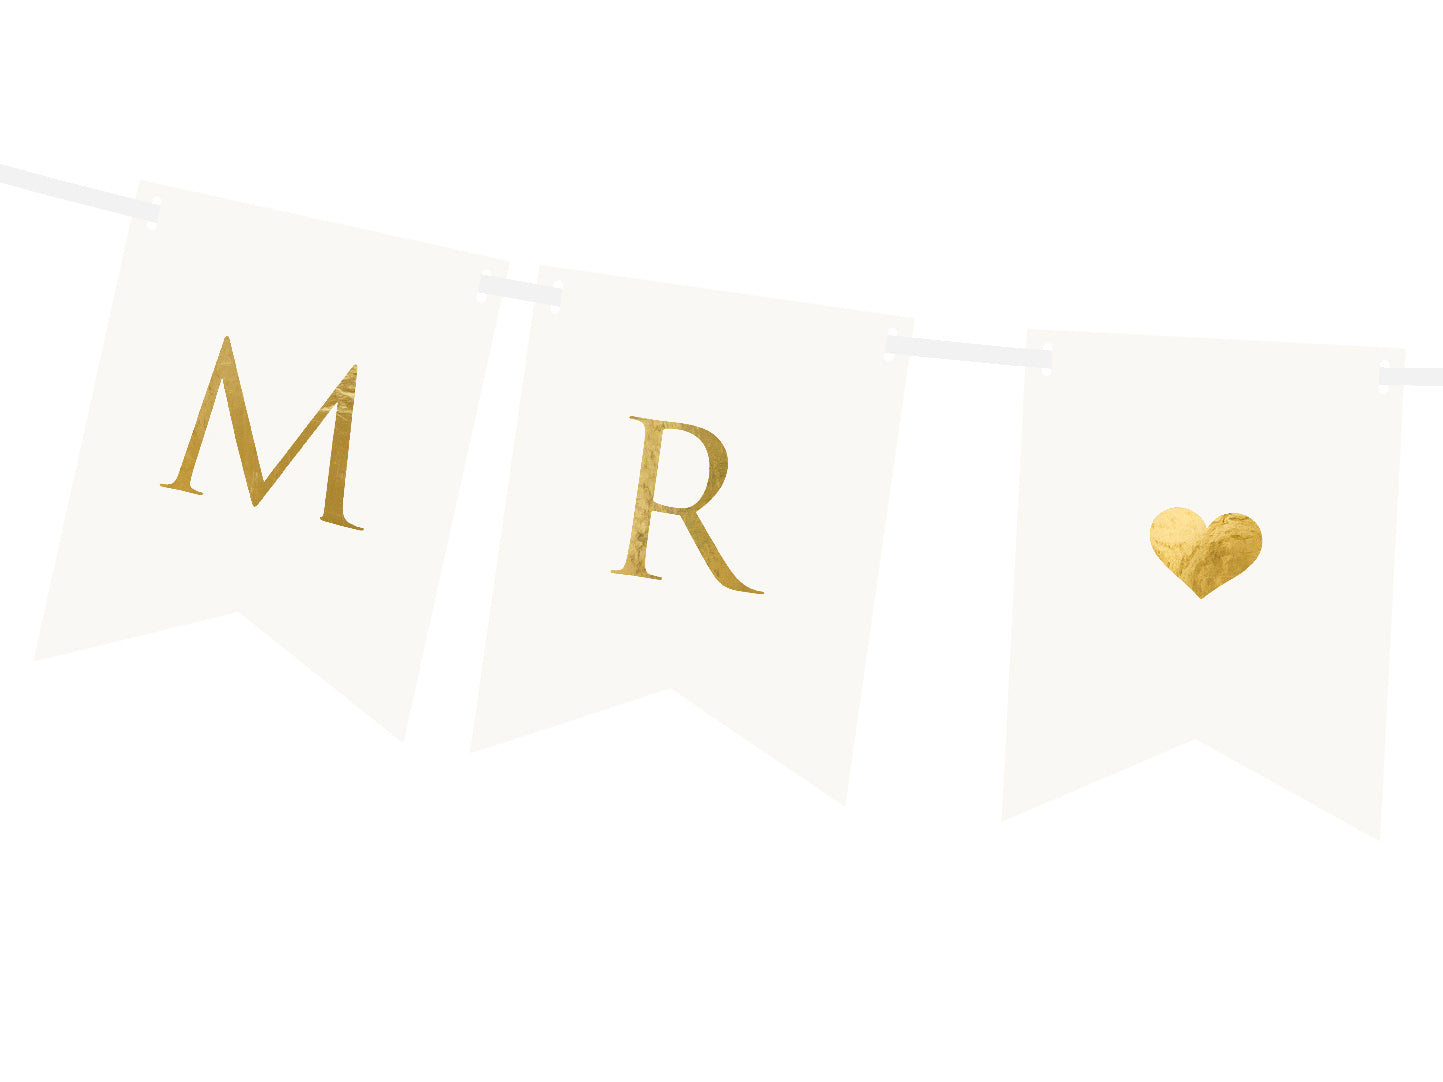 DIY White and Gold Mr. & Mrs. Pennant Banner | The Party Darling